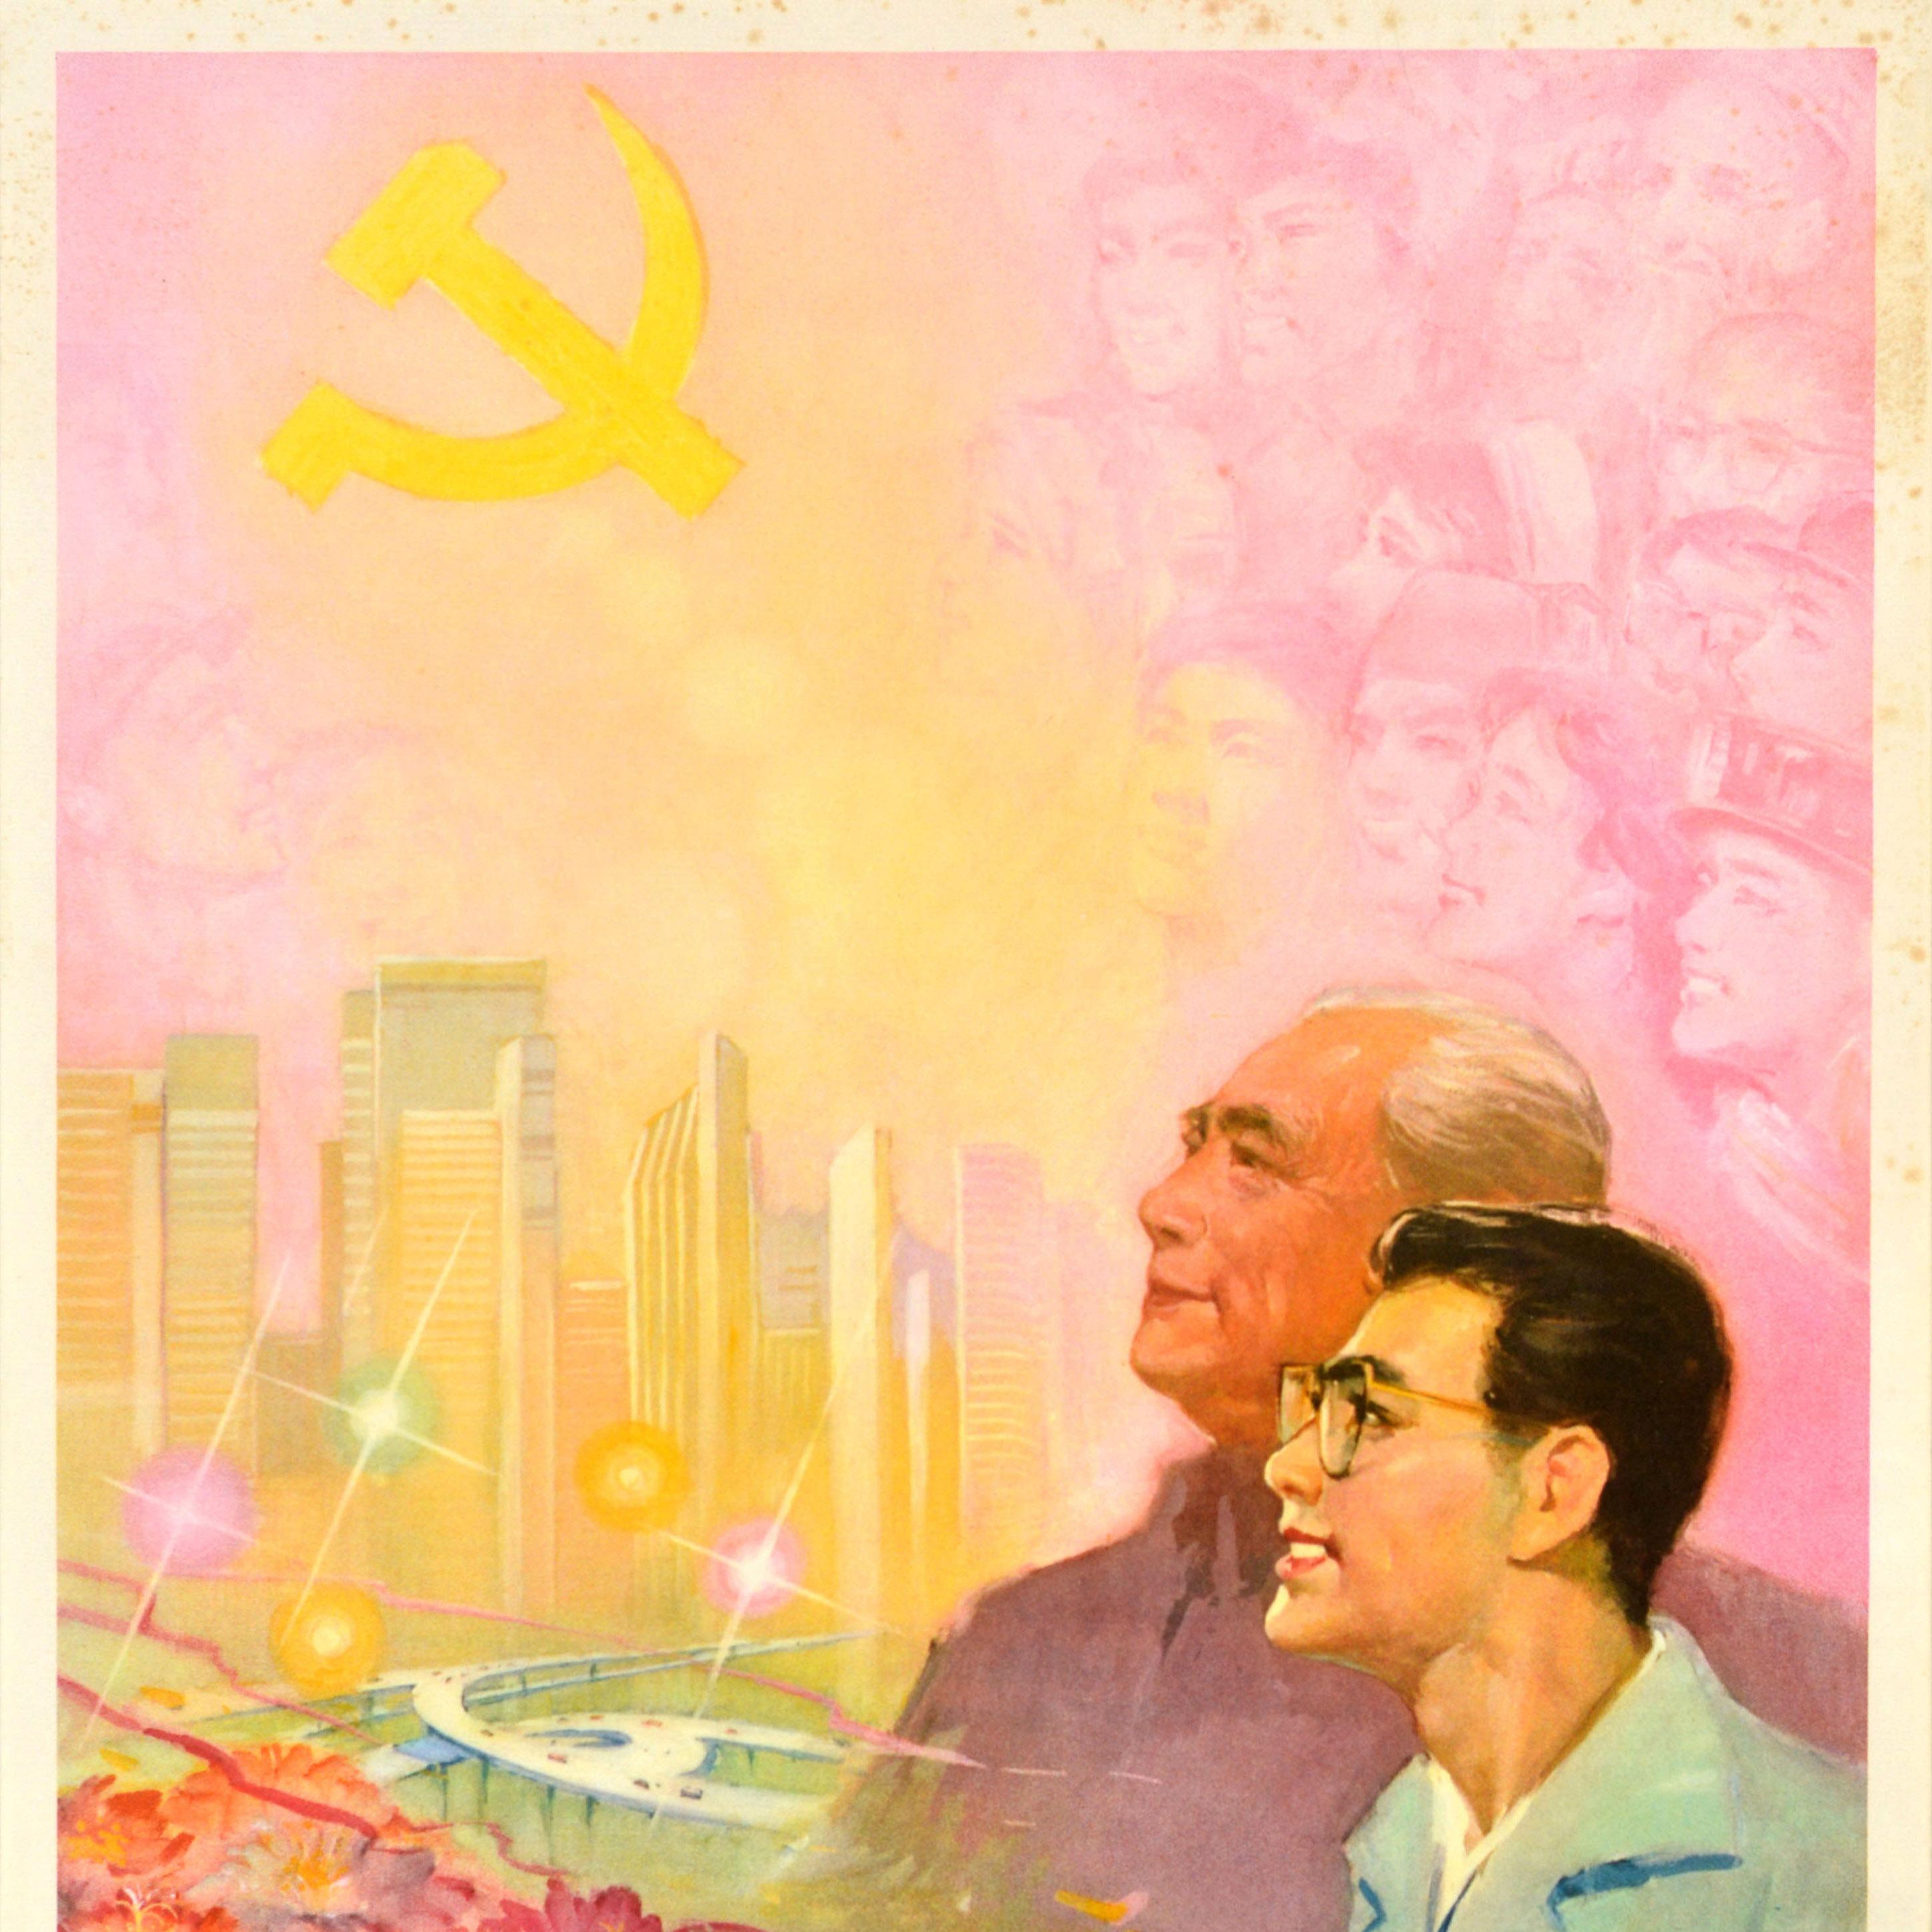 Original Vintage Chinese Communist Party Propaganda Poster Revitalise China - Orange Print by Unknown